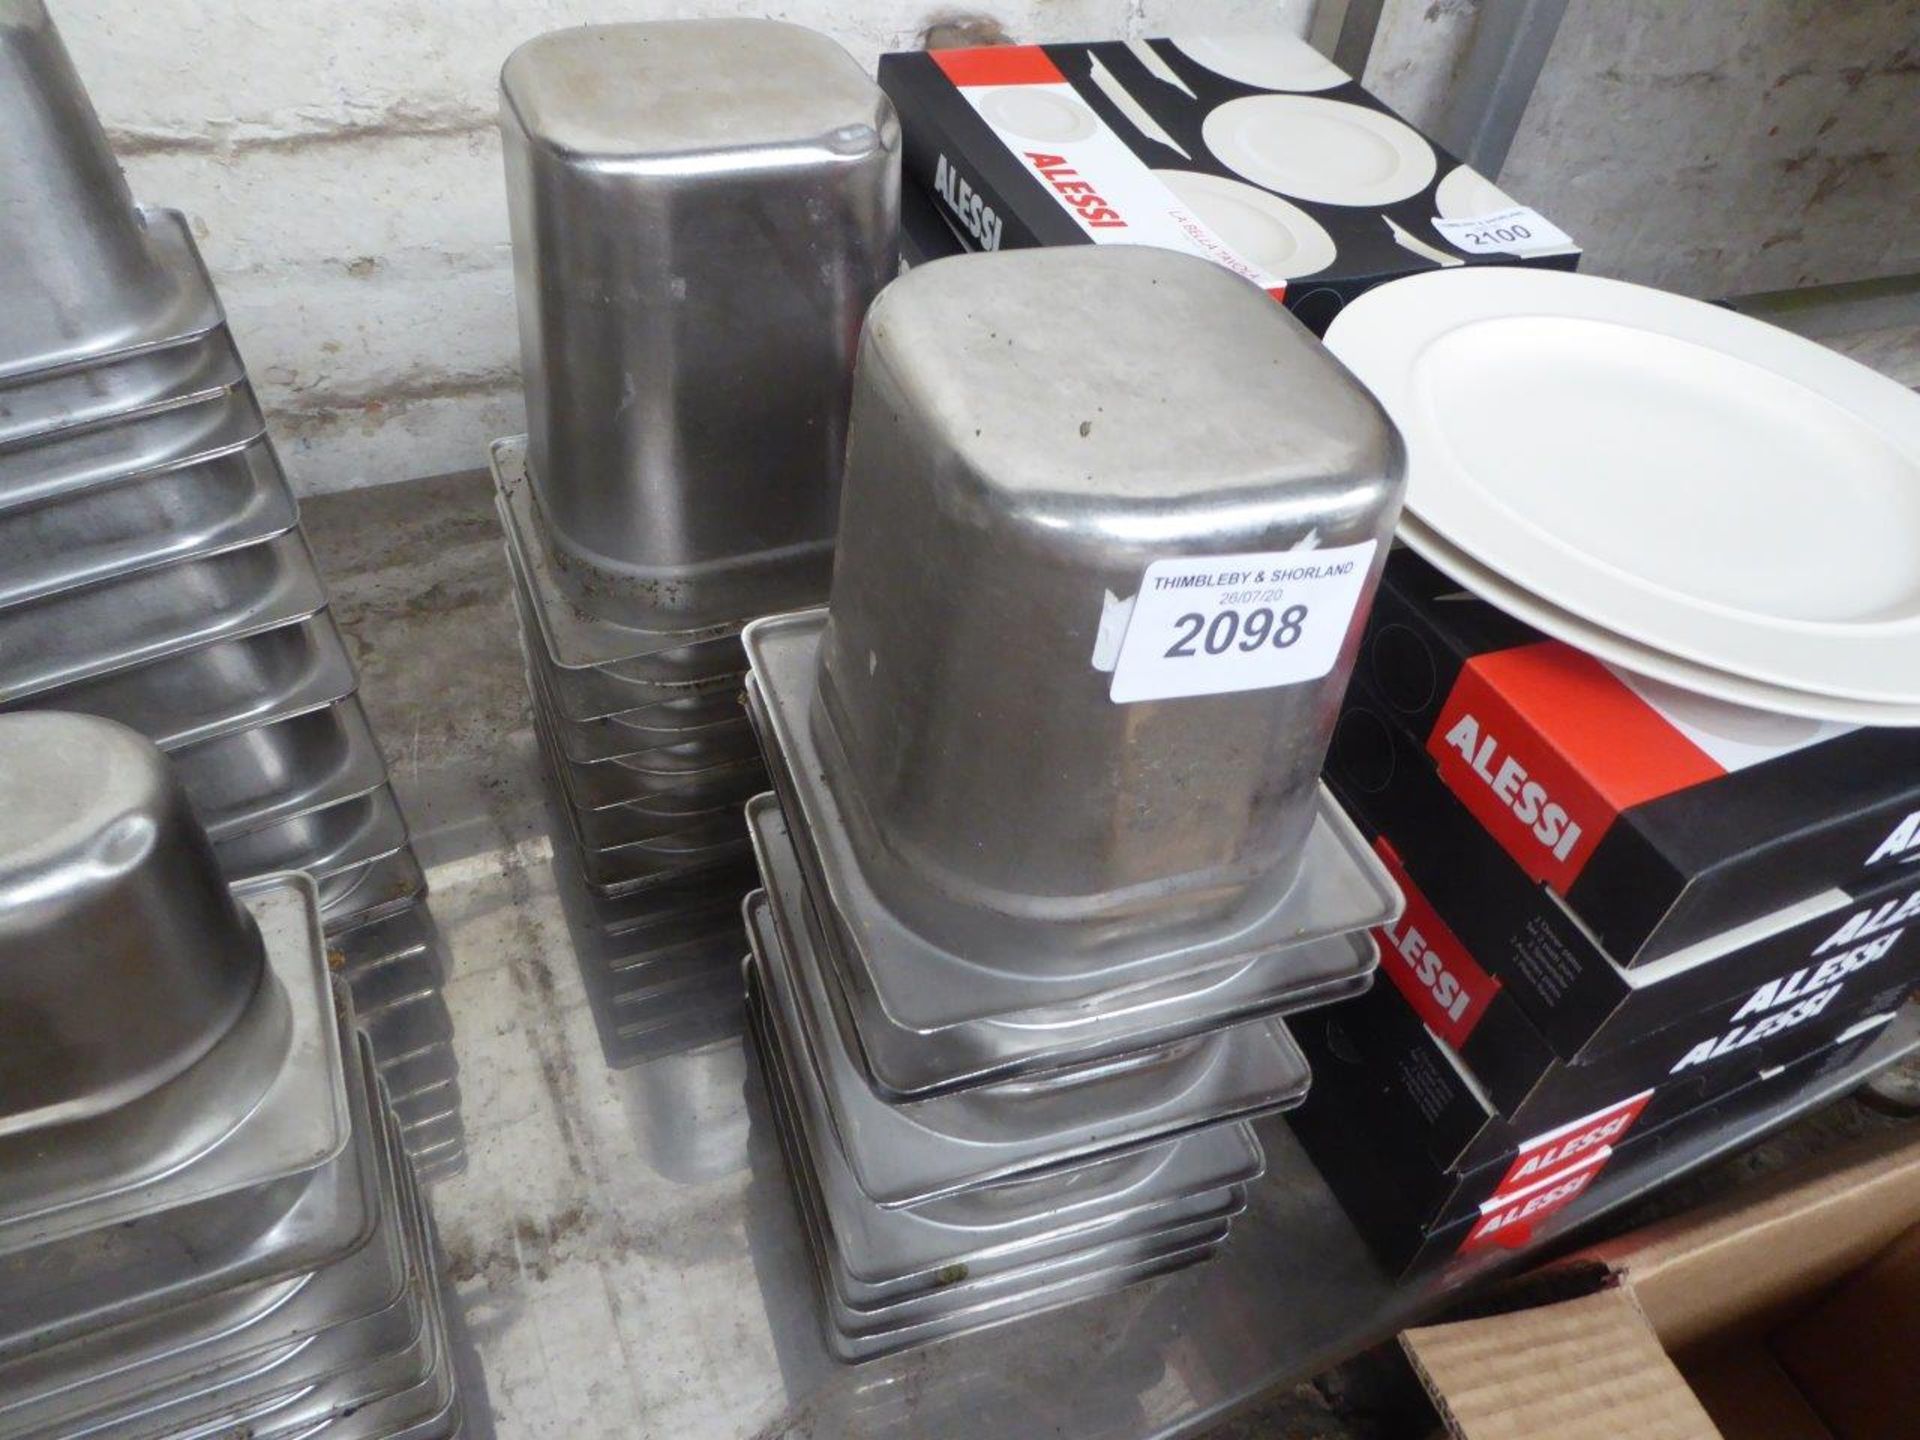 15 stainless steel gastronome pots